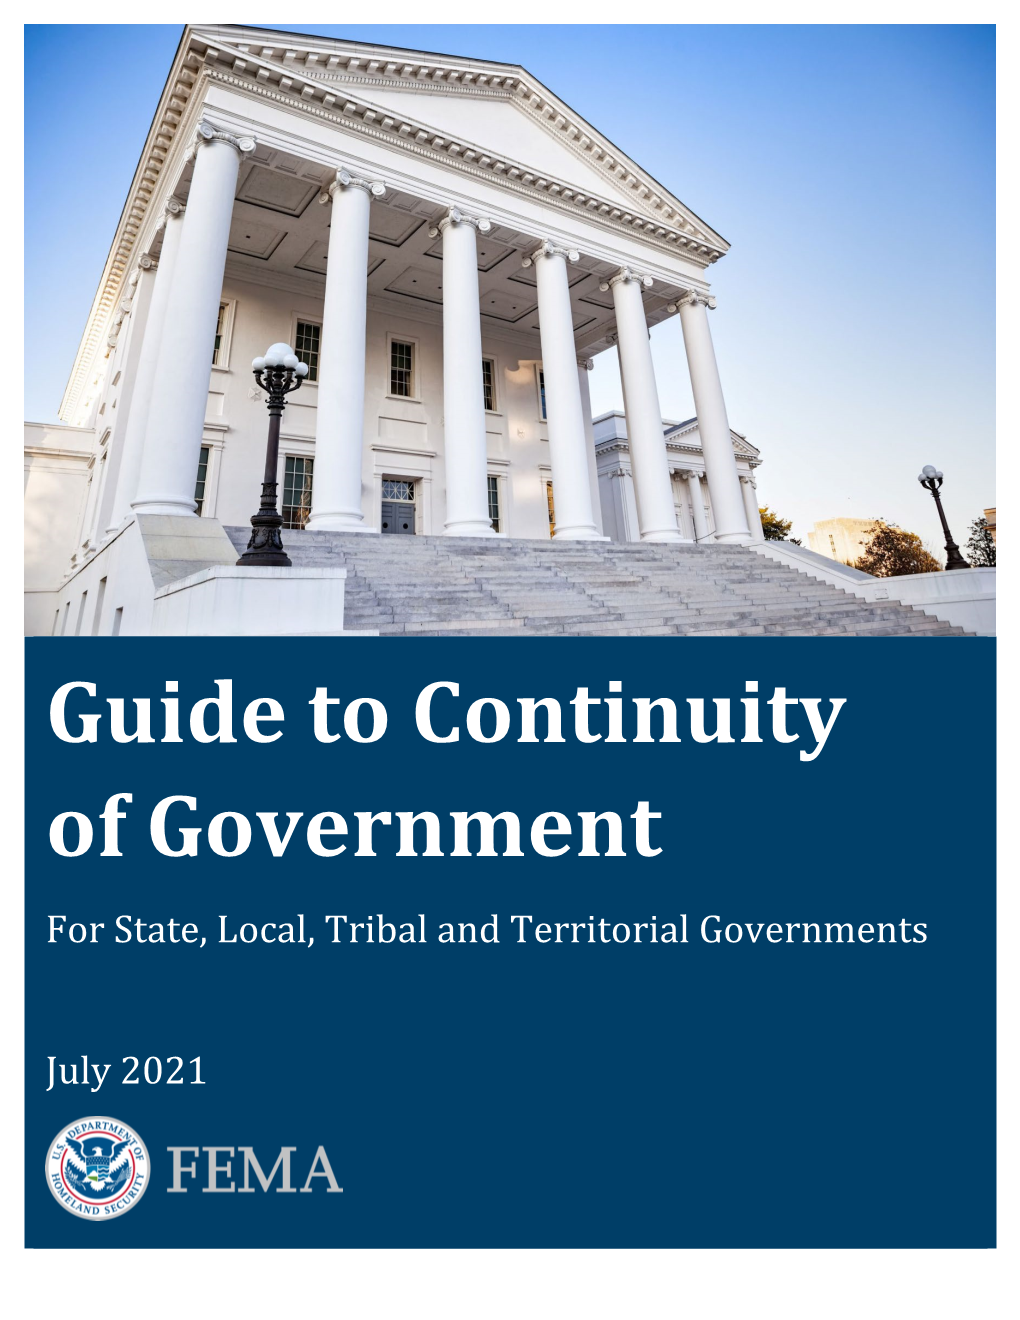 Guide to Continuity of Government for State, Local, Territorial, and Tribal